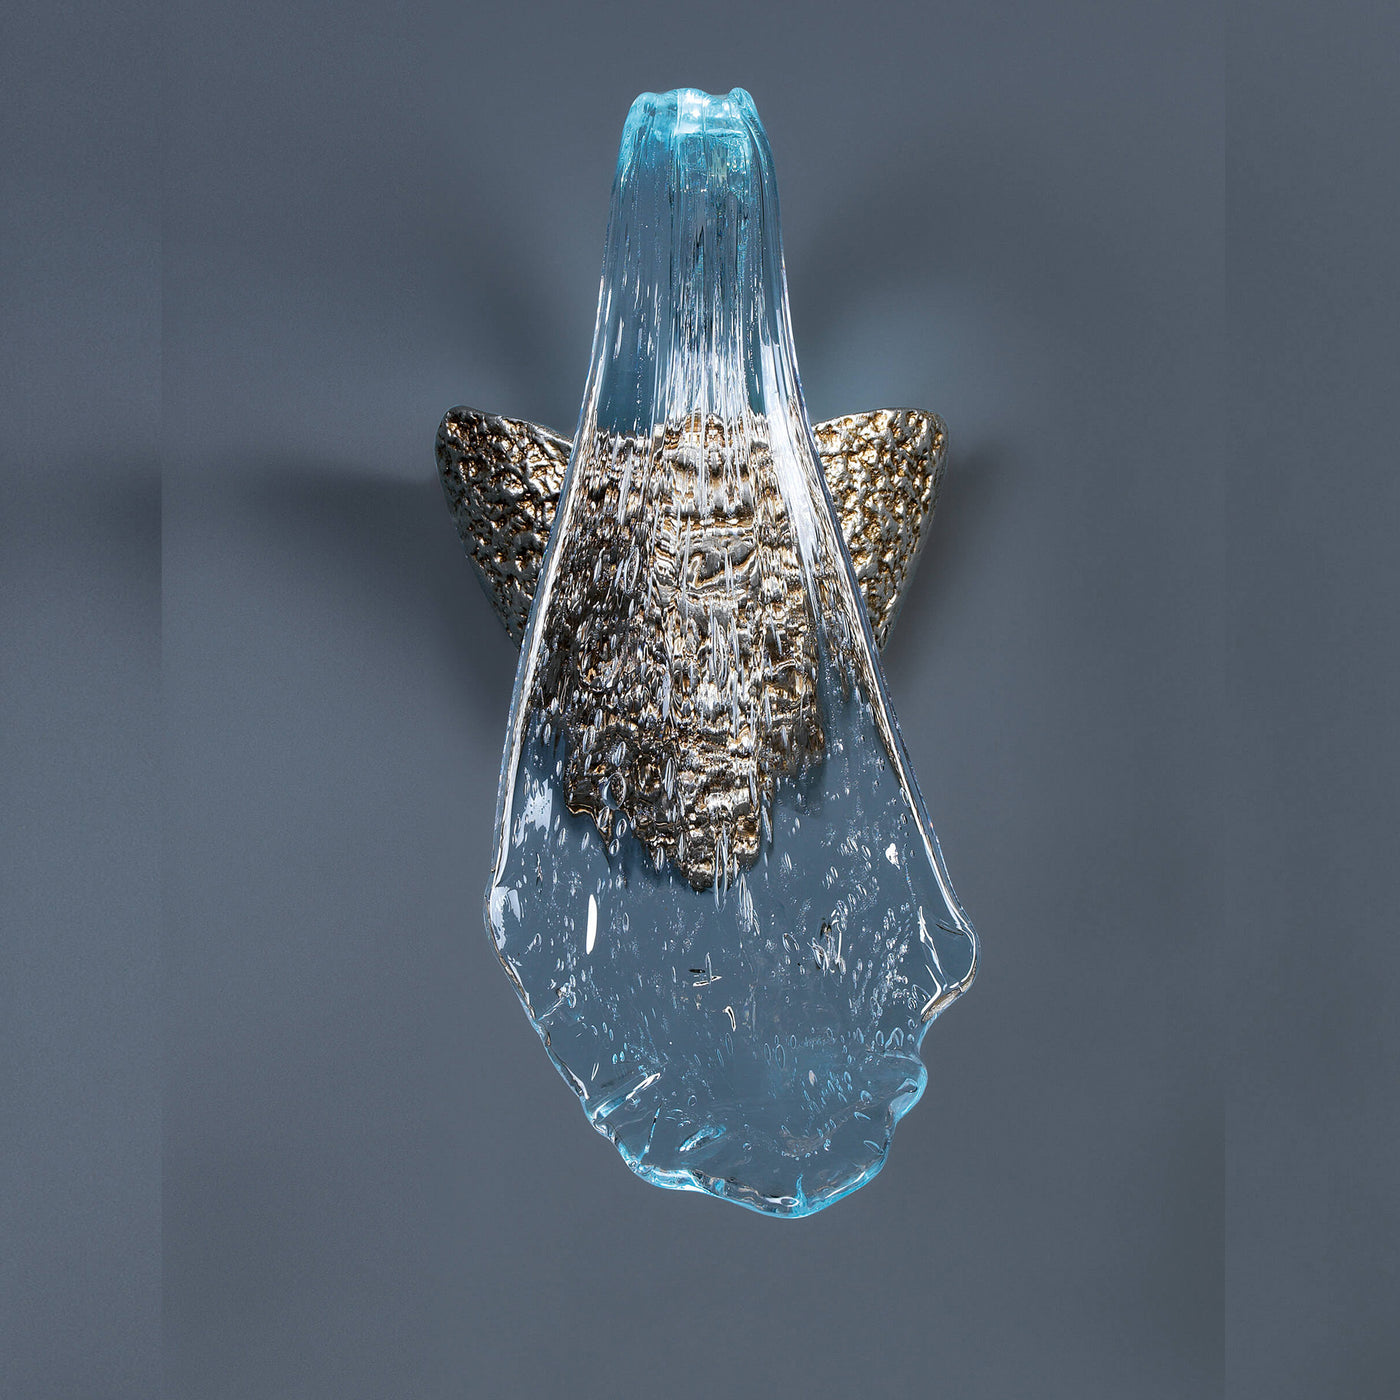 Cold spring water whole house lamp series